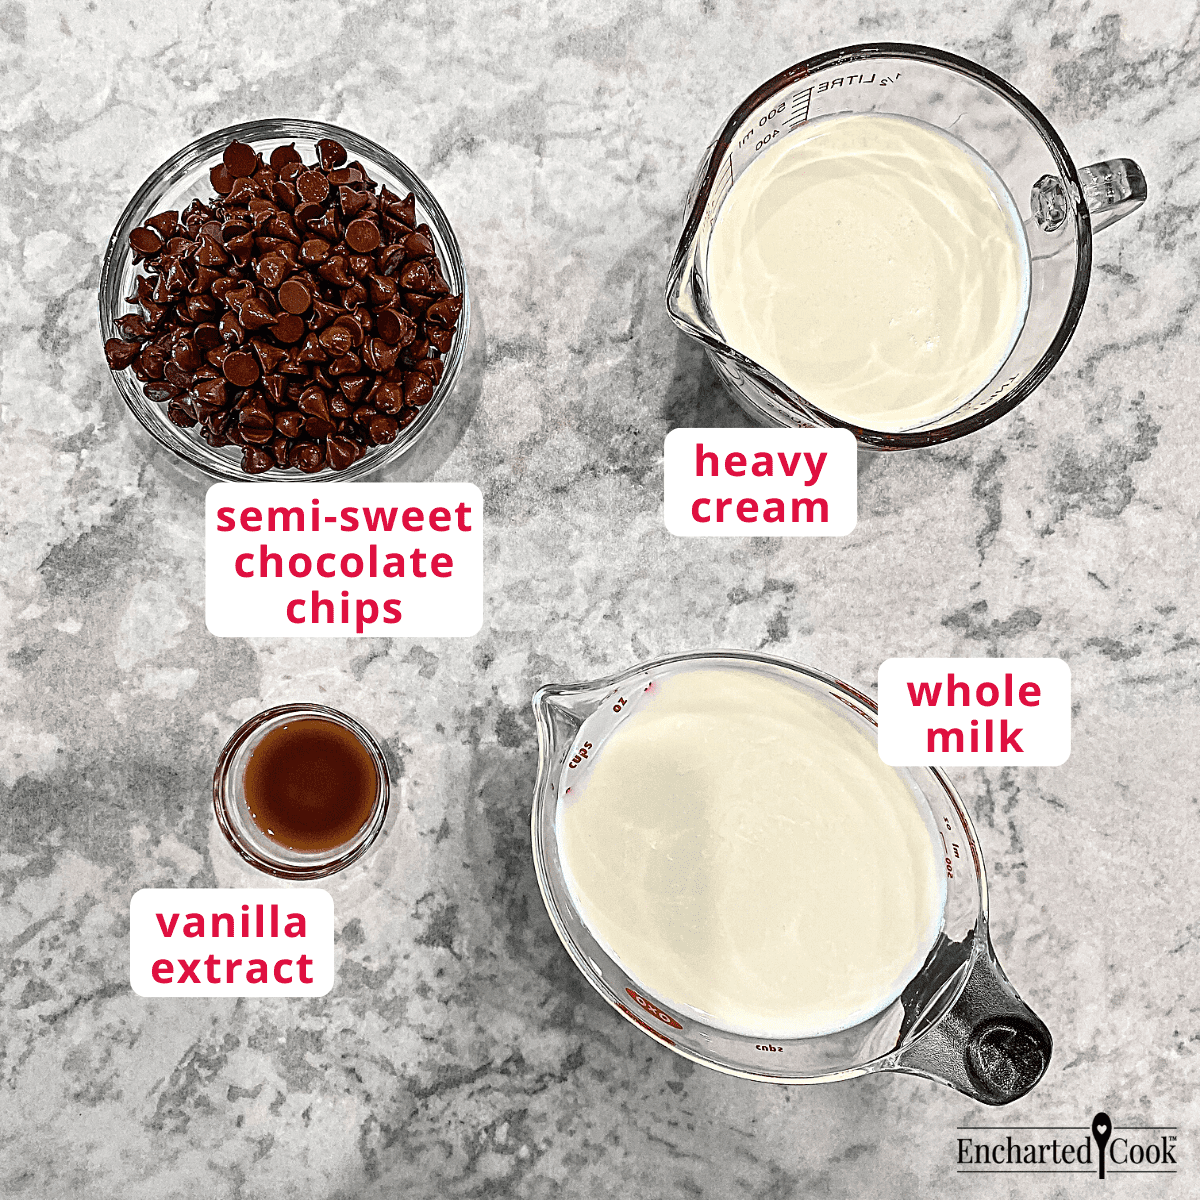 The ingredients, clockwise from top right: heavy cream, whole milk, vanilla extract, and semi-sweet chocolate chips.